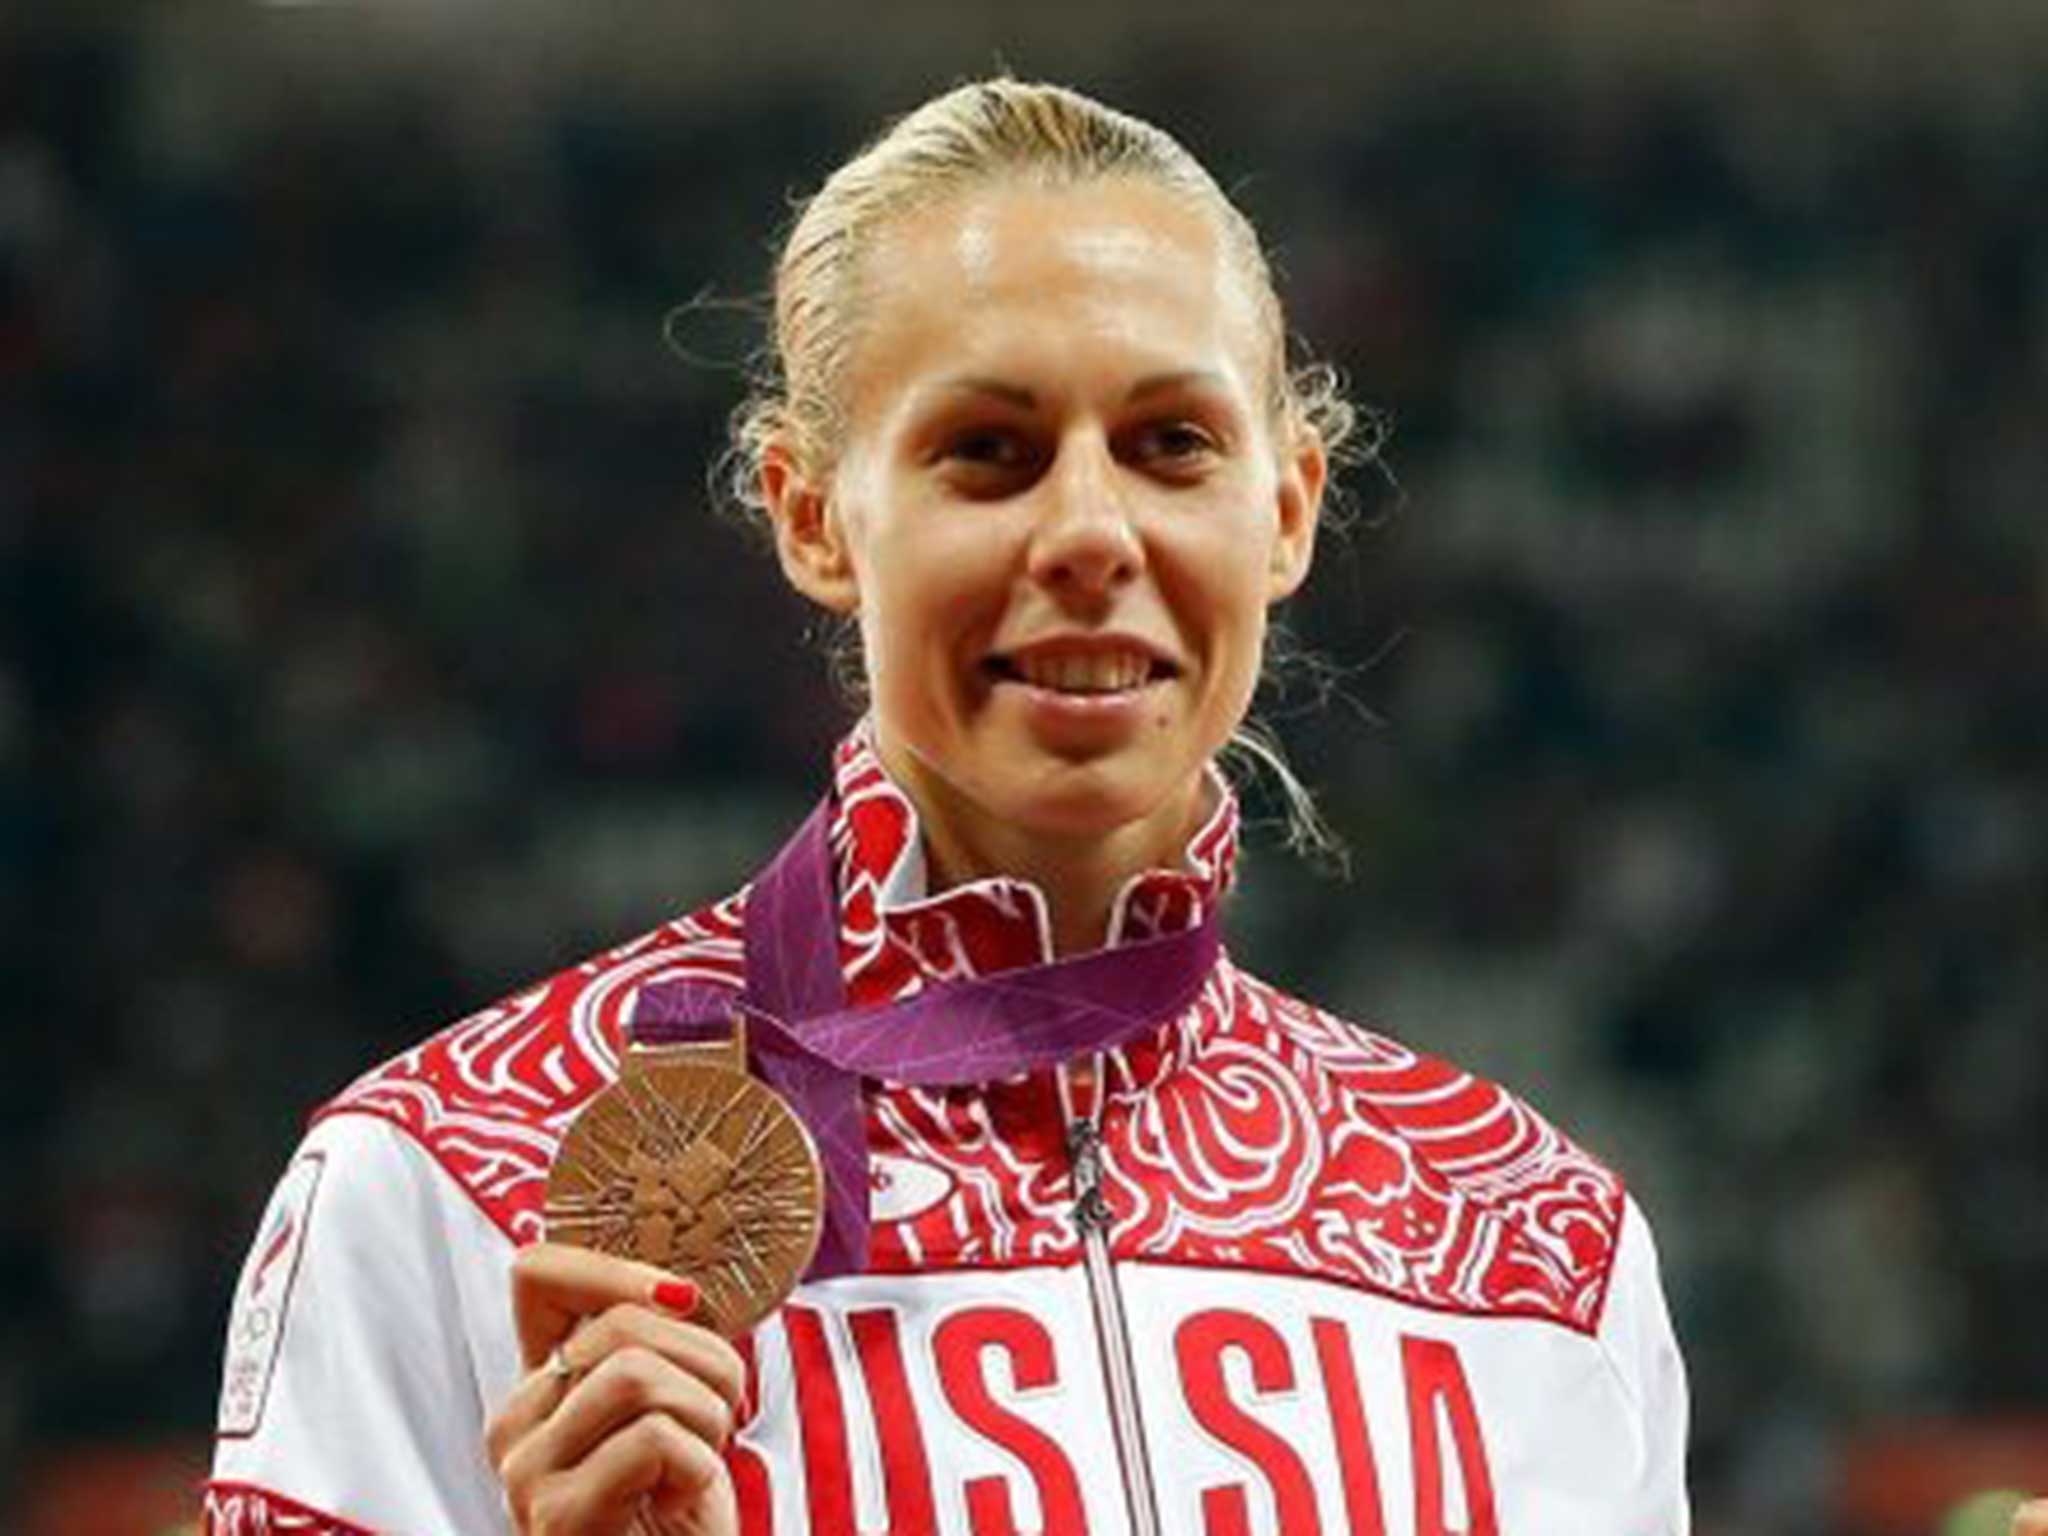 Tatyana Chernova won gold in 2011 but failed a drugs test from 2009, when it was retested